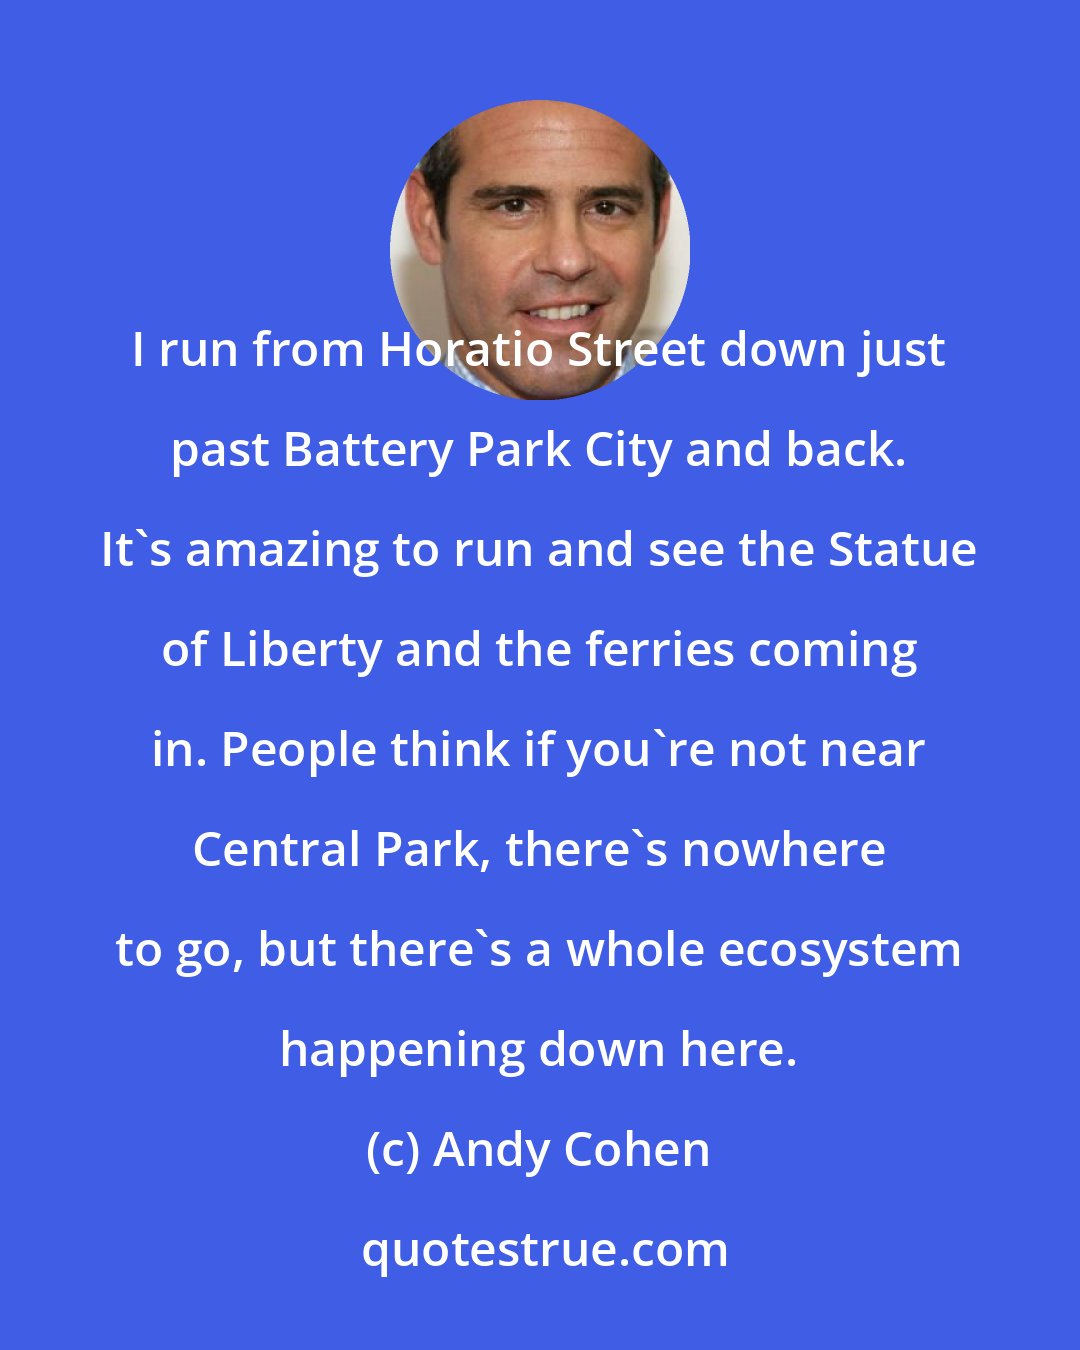 Andy Cohen: I run from Horatio Street down just past Battery Park City and back. It's amazing to run and see the Statue of Liberty and the ferries coming in. People think if you're not near Central Park, there's nowhere to go, but there's a whole ecosystem happening down here.